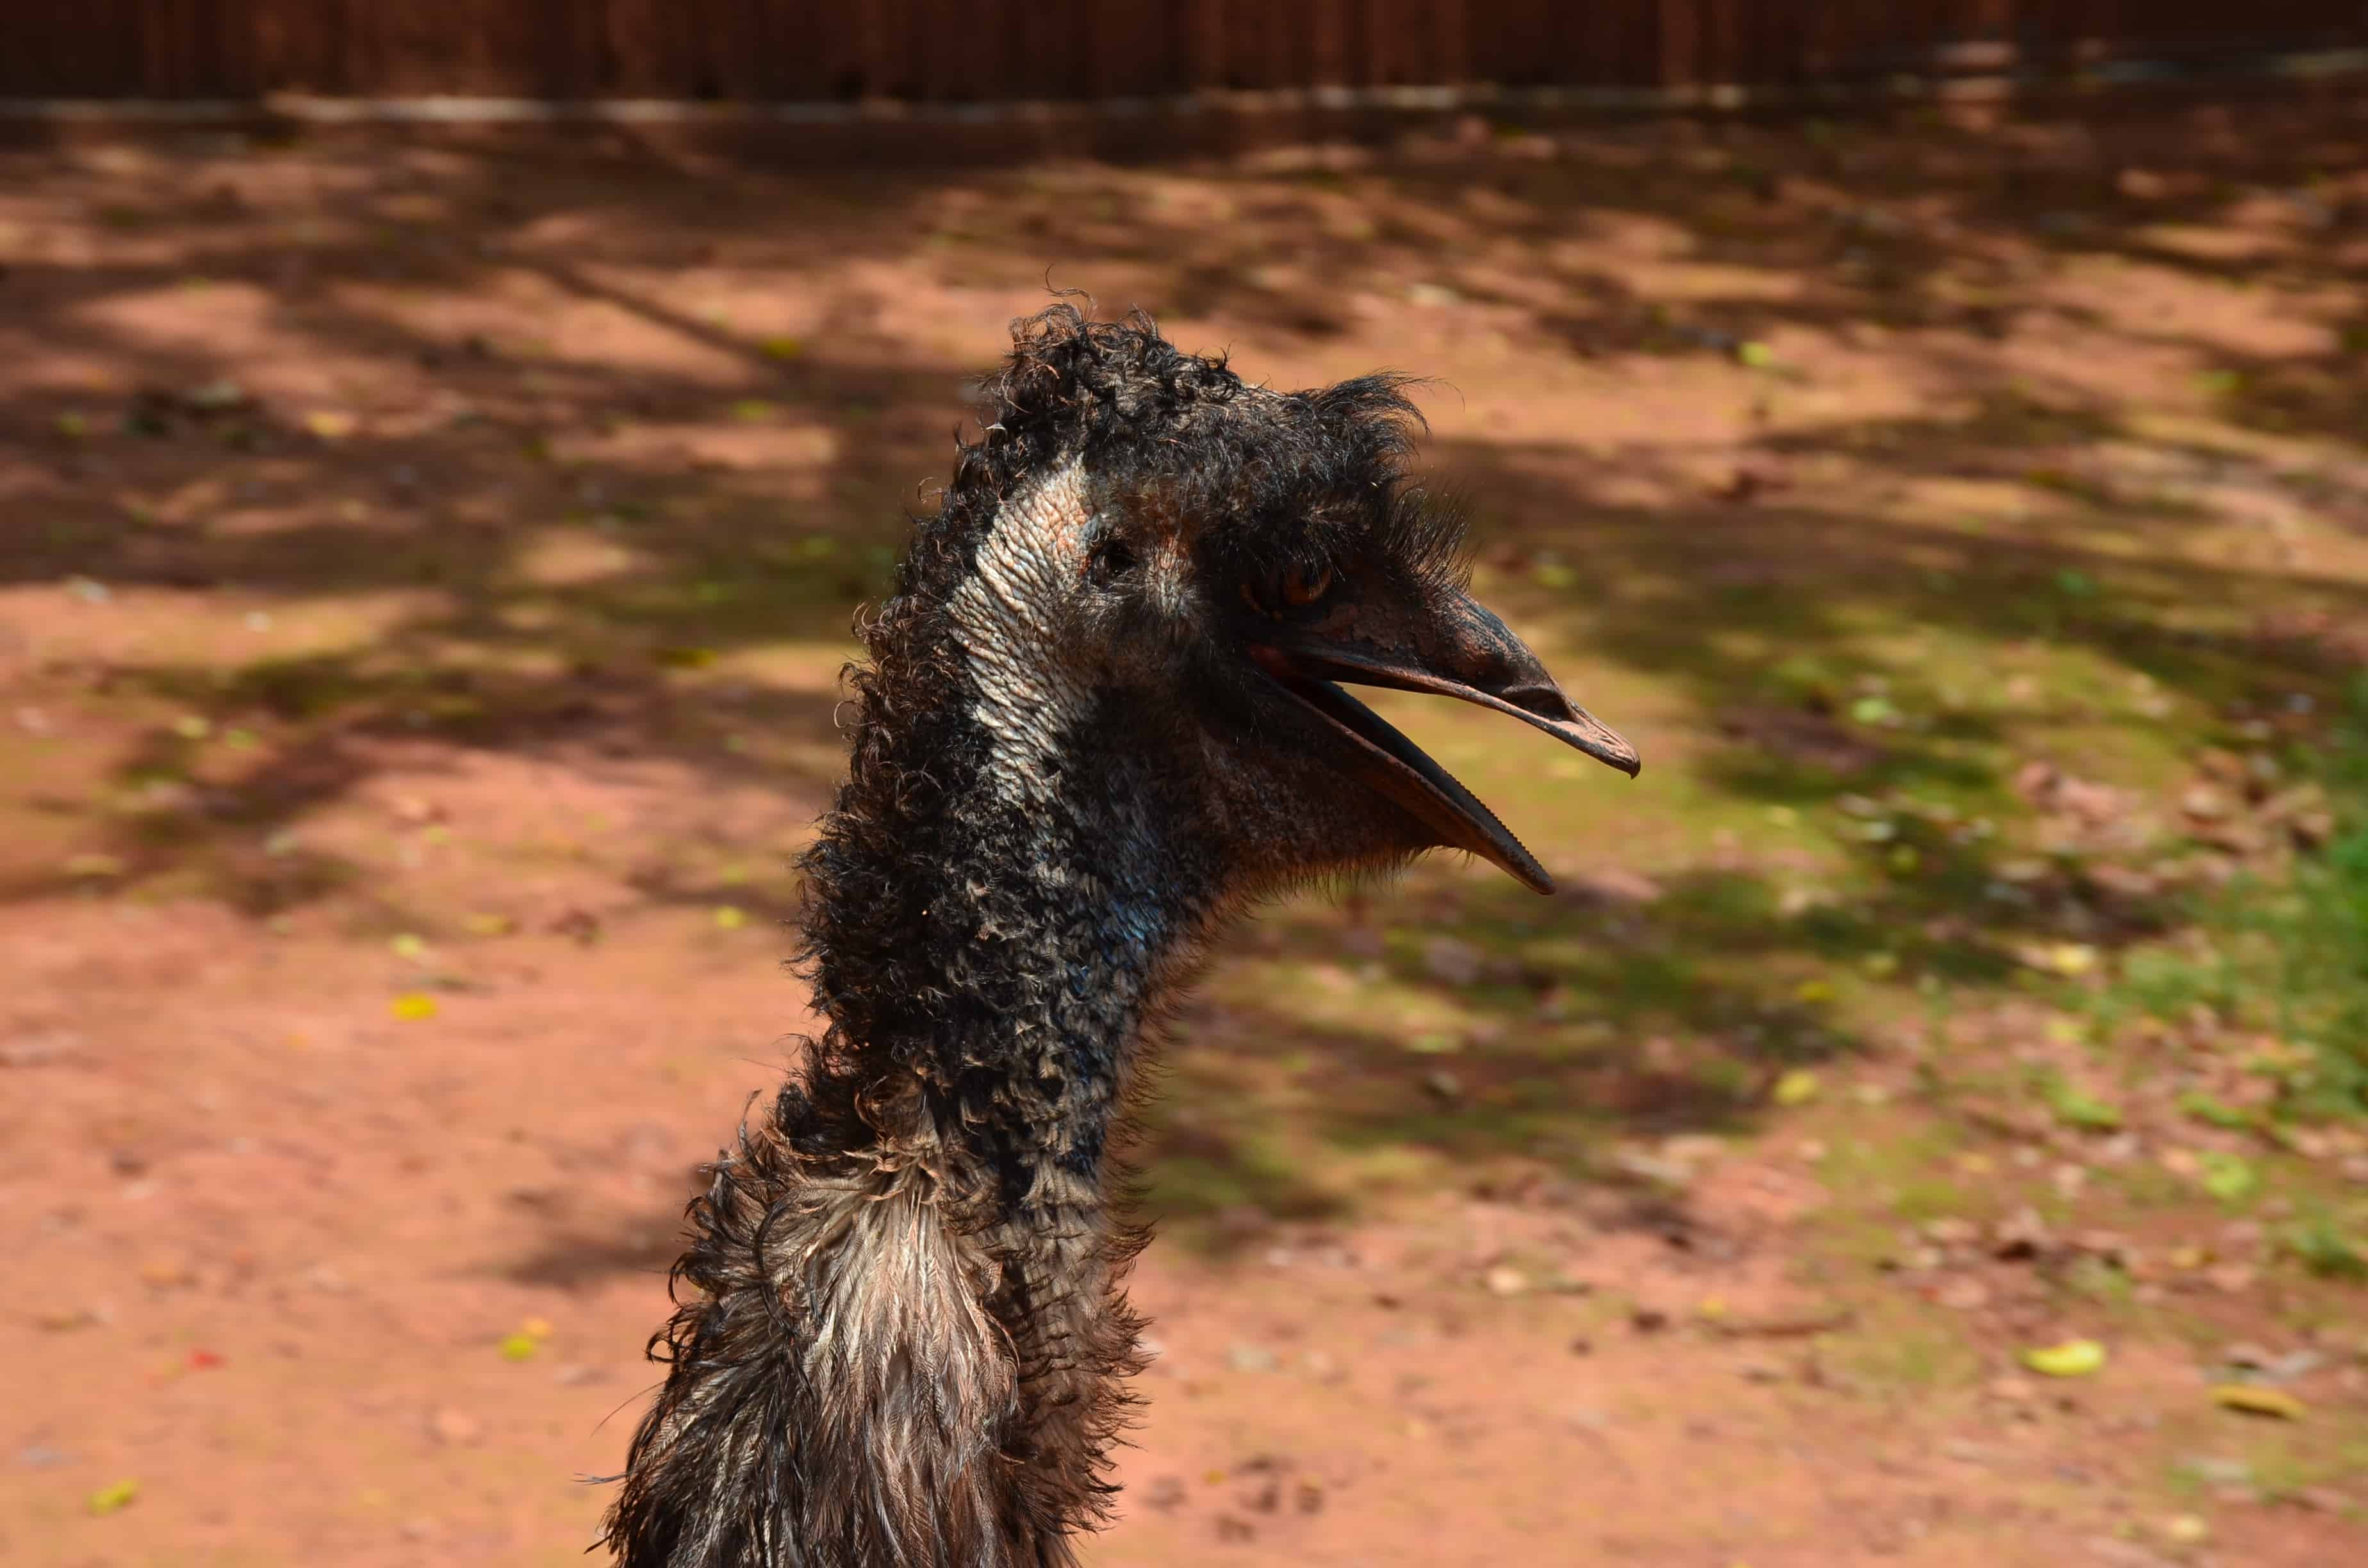 Emu at the Cali Zoo in Colombia